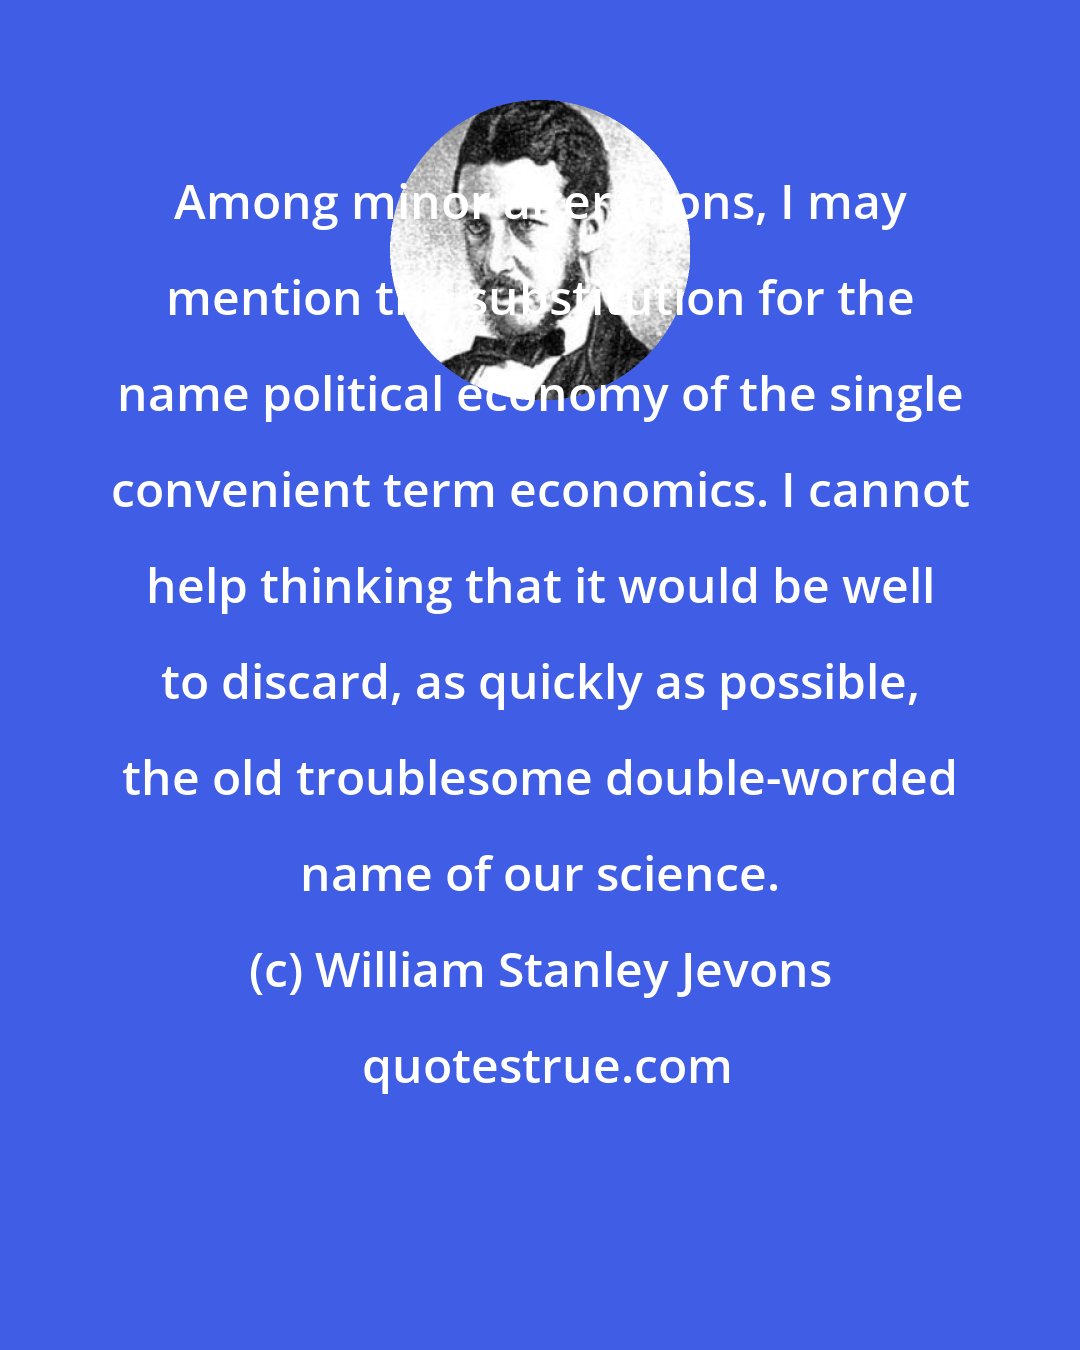 William Stanley Jevons: Among minor alterations, I may mention the substitution for the name political economy of the single convenient term economics. I cannot help thinking that it would be well to discard, as quickly as possible, the old troublesome double-worded name of our science.